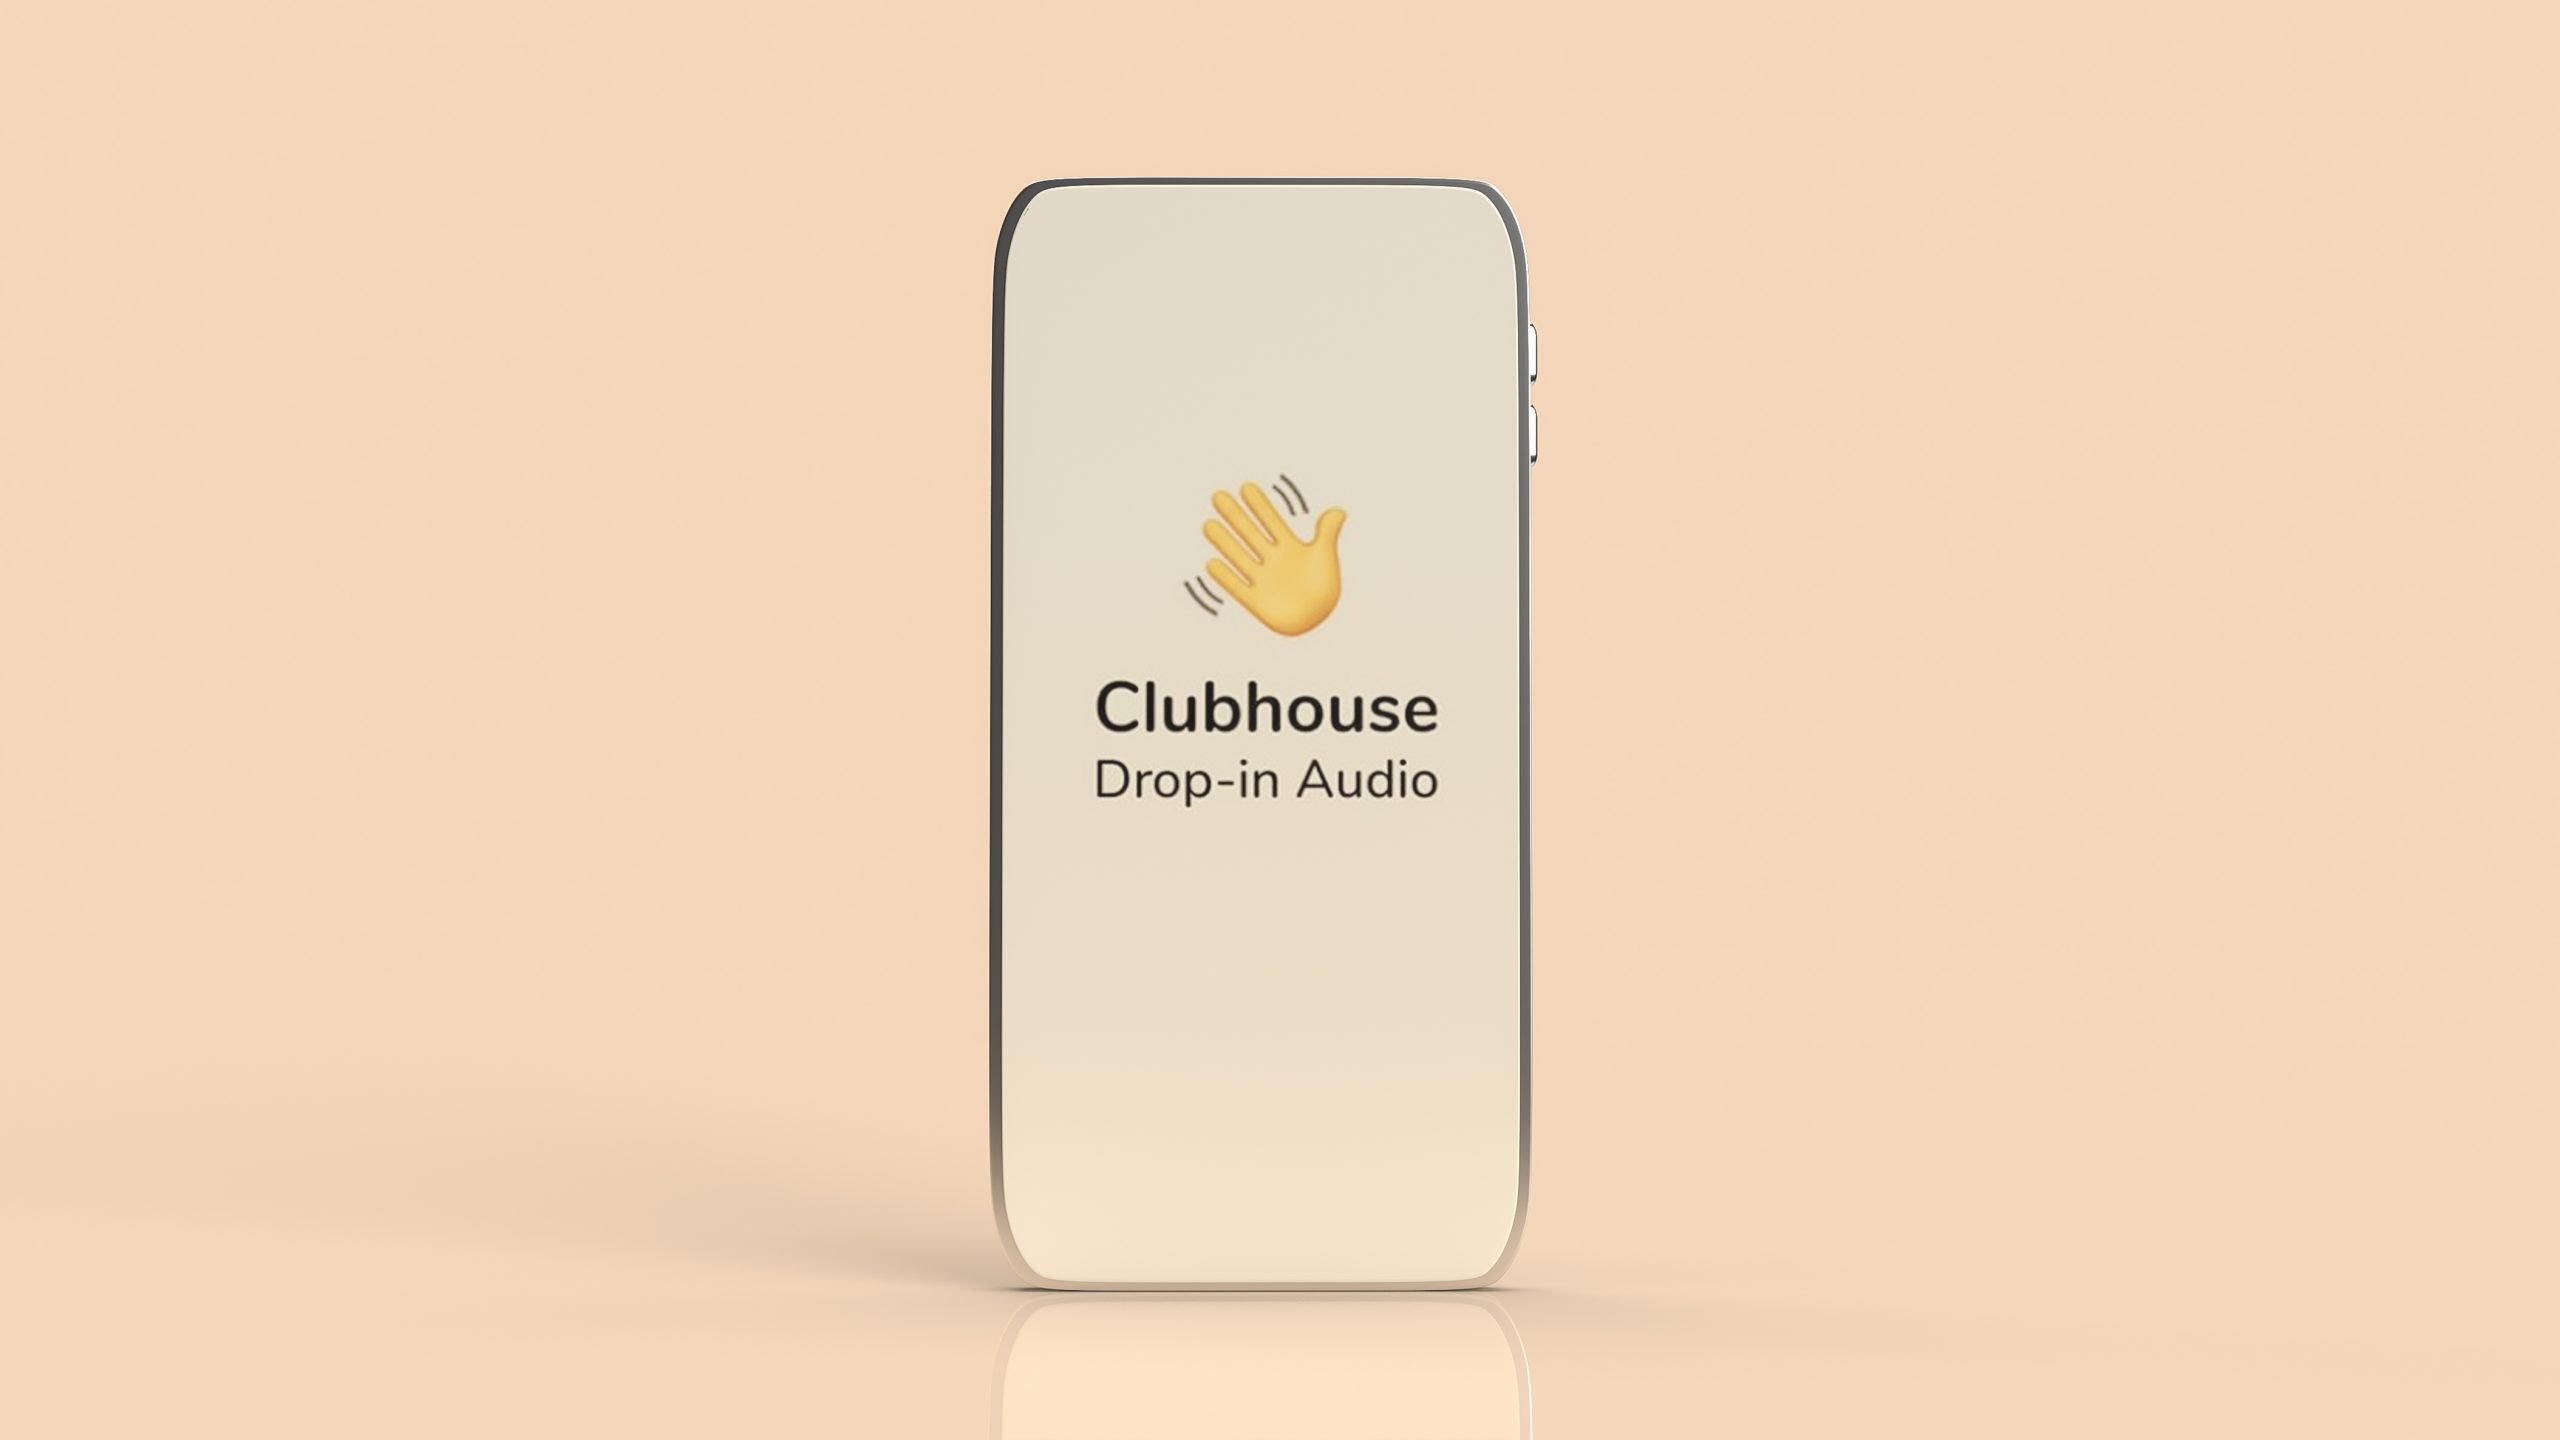 Clubhouse features that should be counted on for growth